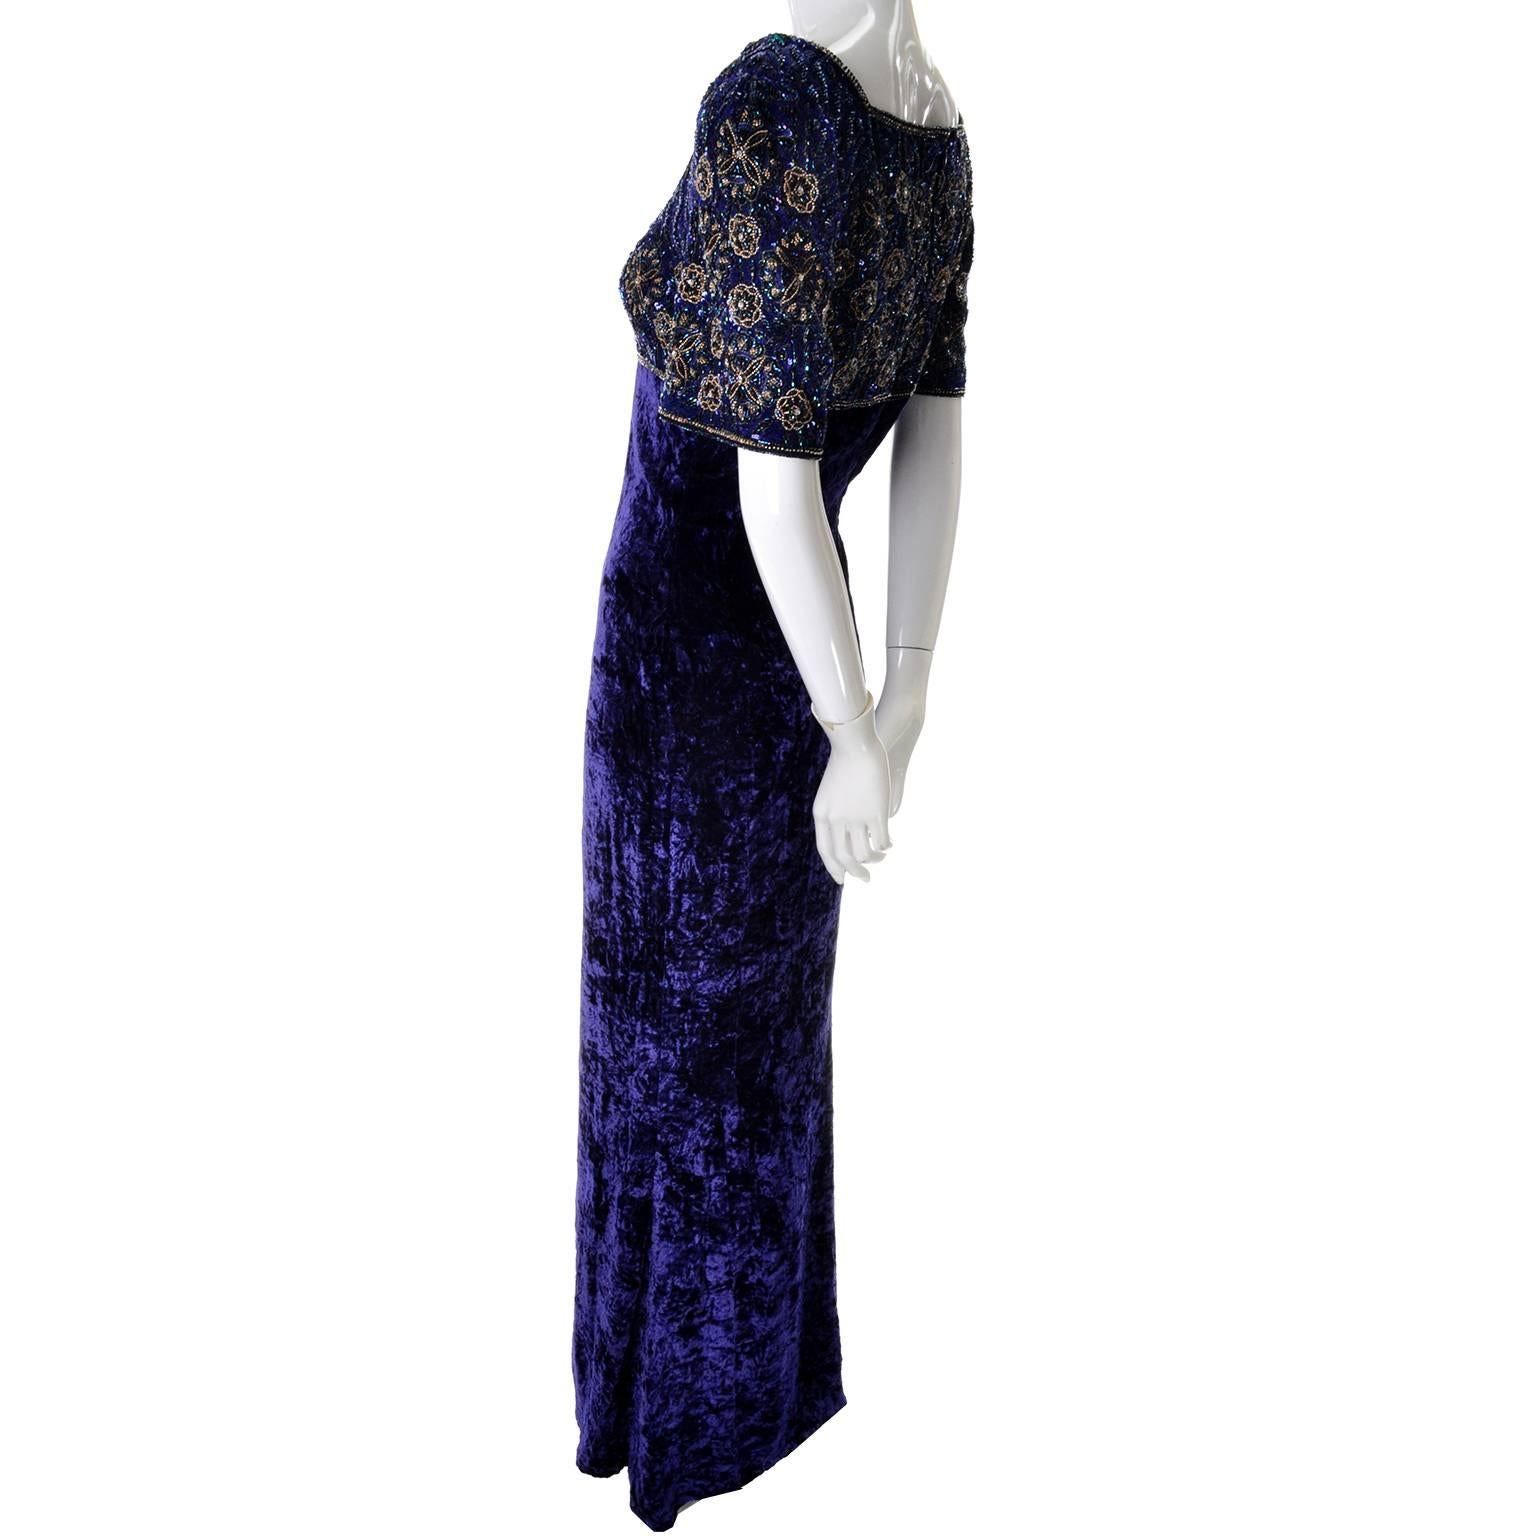 This beautiful blue vintage Escada Couture evening gown has a beaded bodice with beads and sequins creating a radial floral designs across the front, back and sleeves. This dress has an umpire waist and square neckline, and the entire dress is